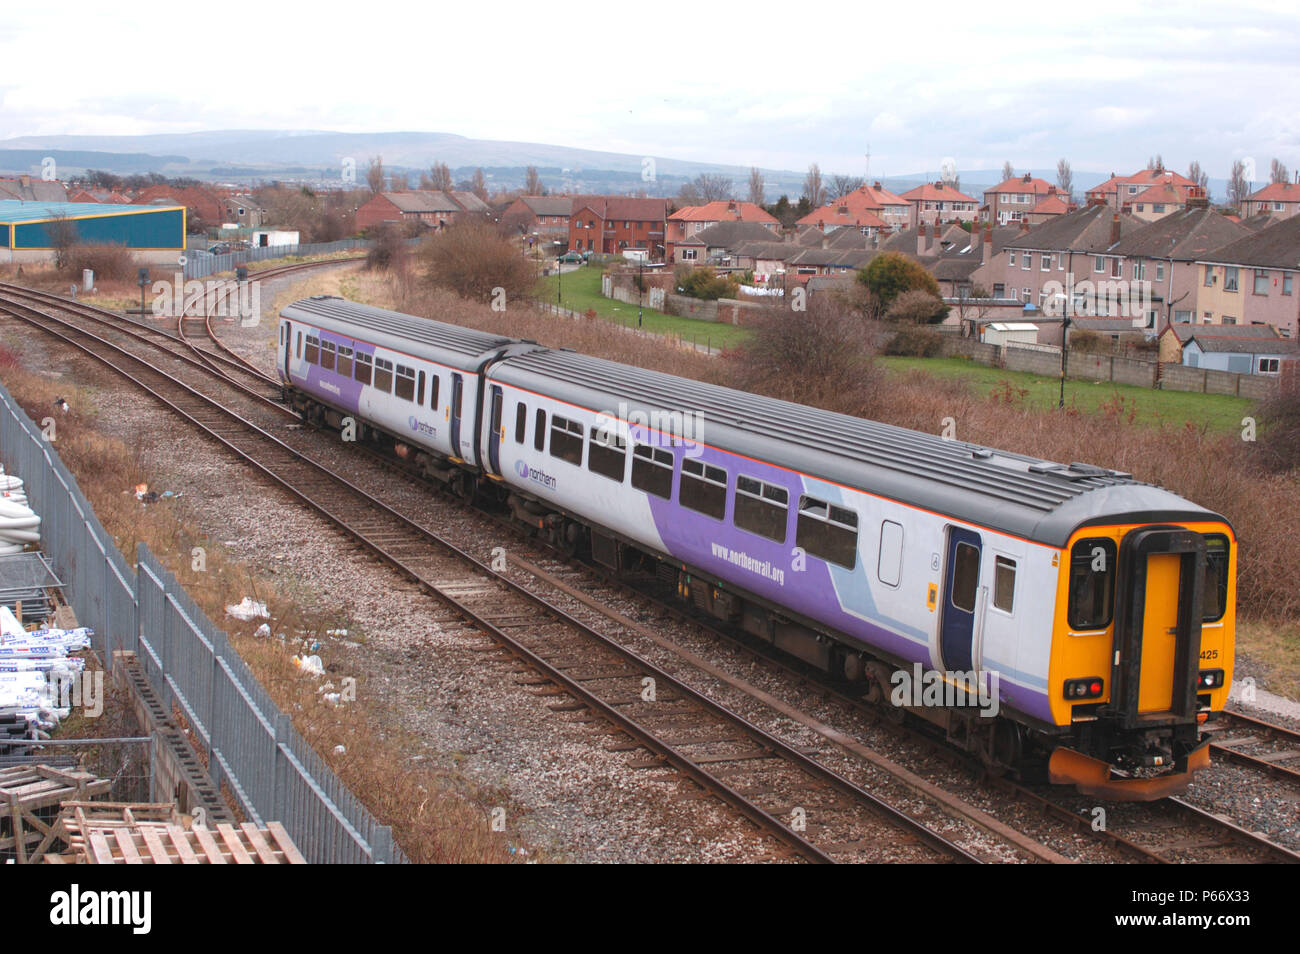 A Class 156 Sprinter DMU trainset, in new Northern Trains lilac livery, approaches Morecambe with a Lancaster - Heysham Port service. March 2005. Stock Photo